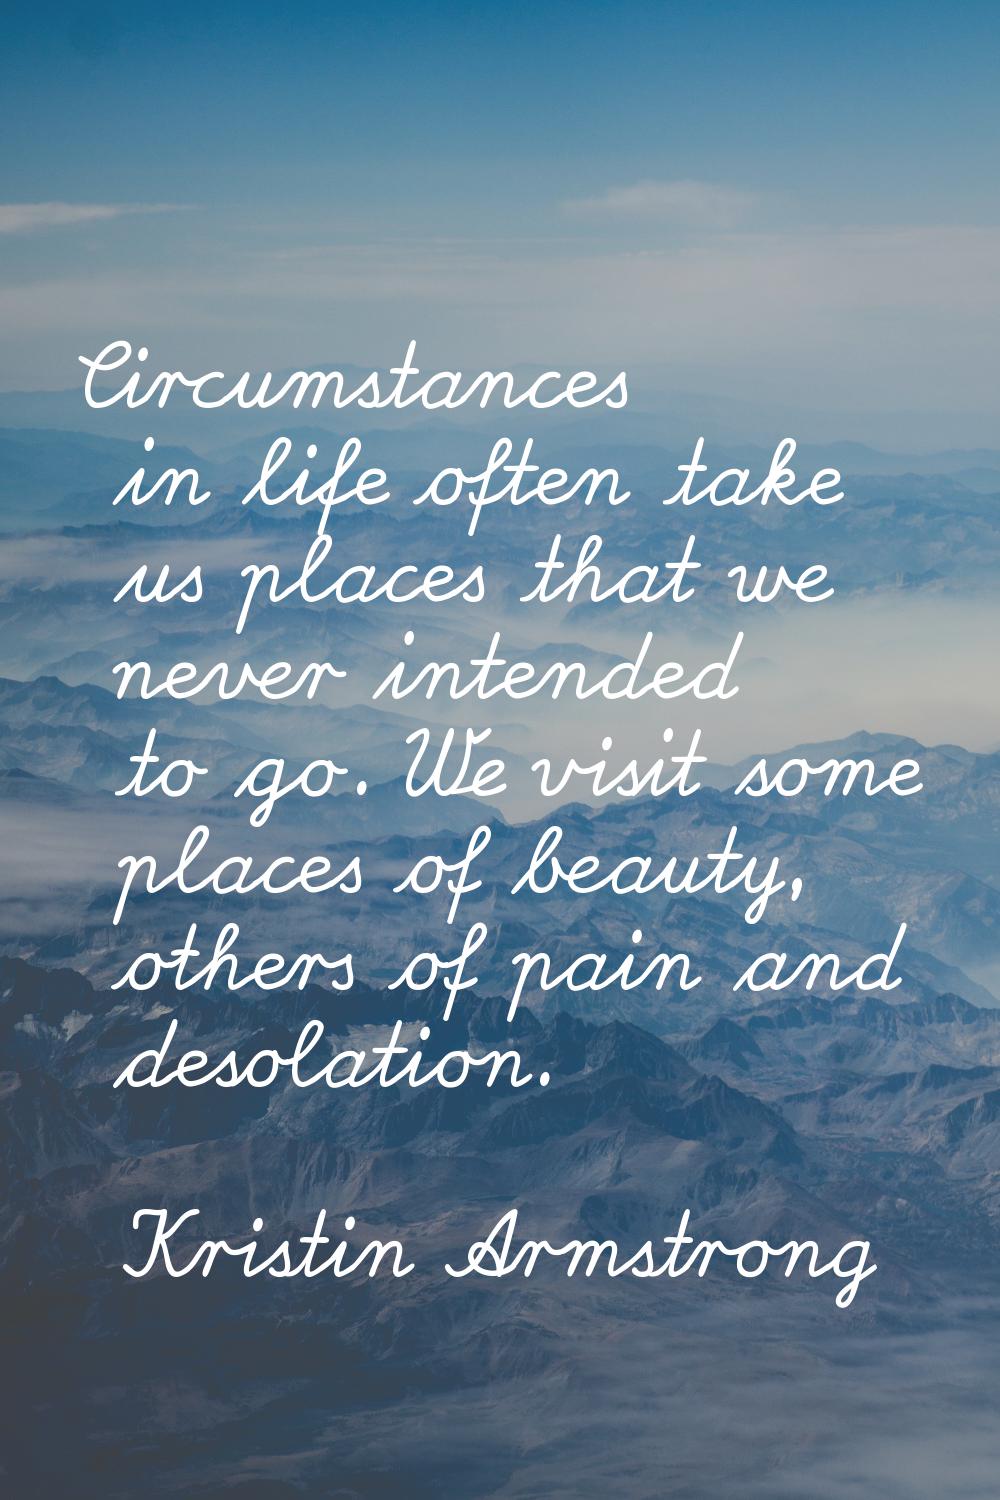 Circumstances in life often take us places that we never intended to go. We visit some places of be